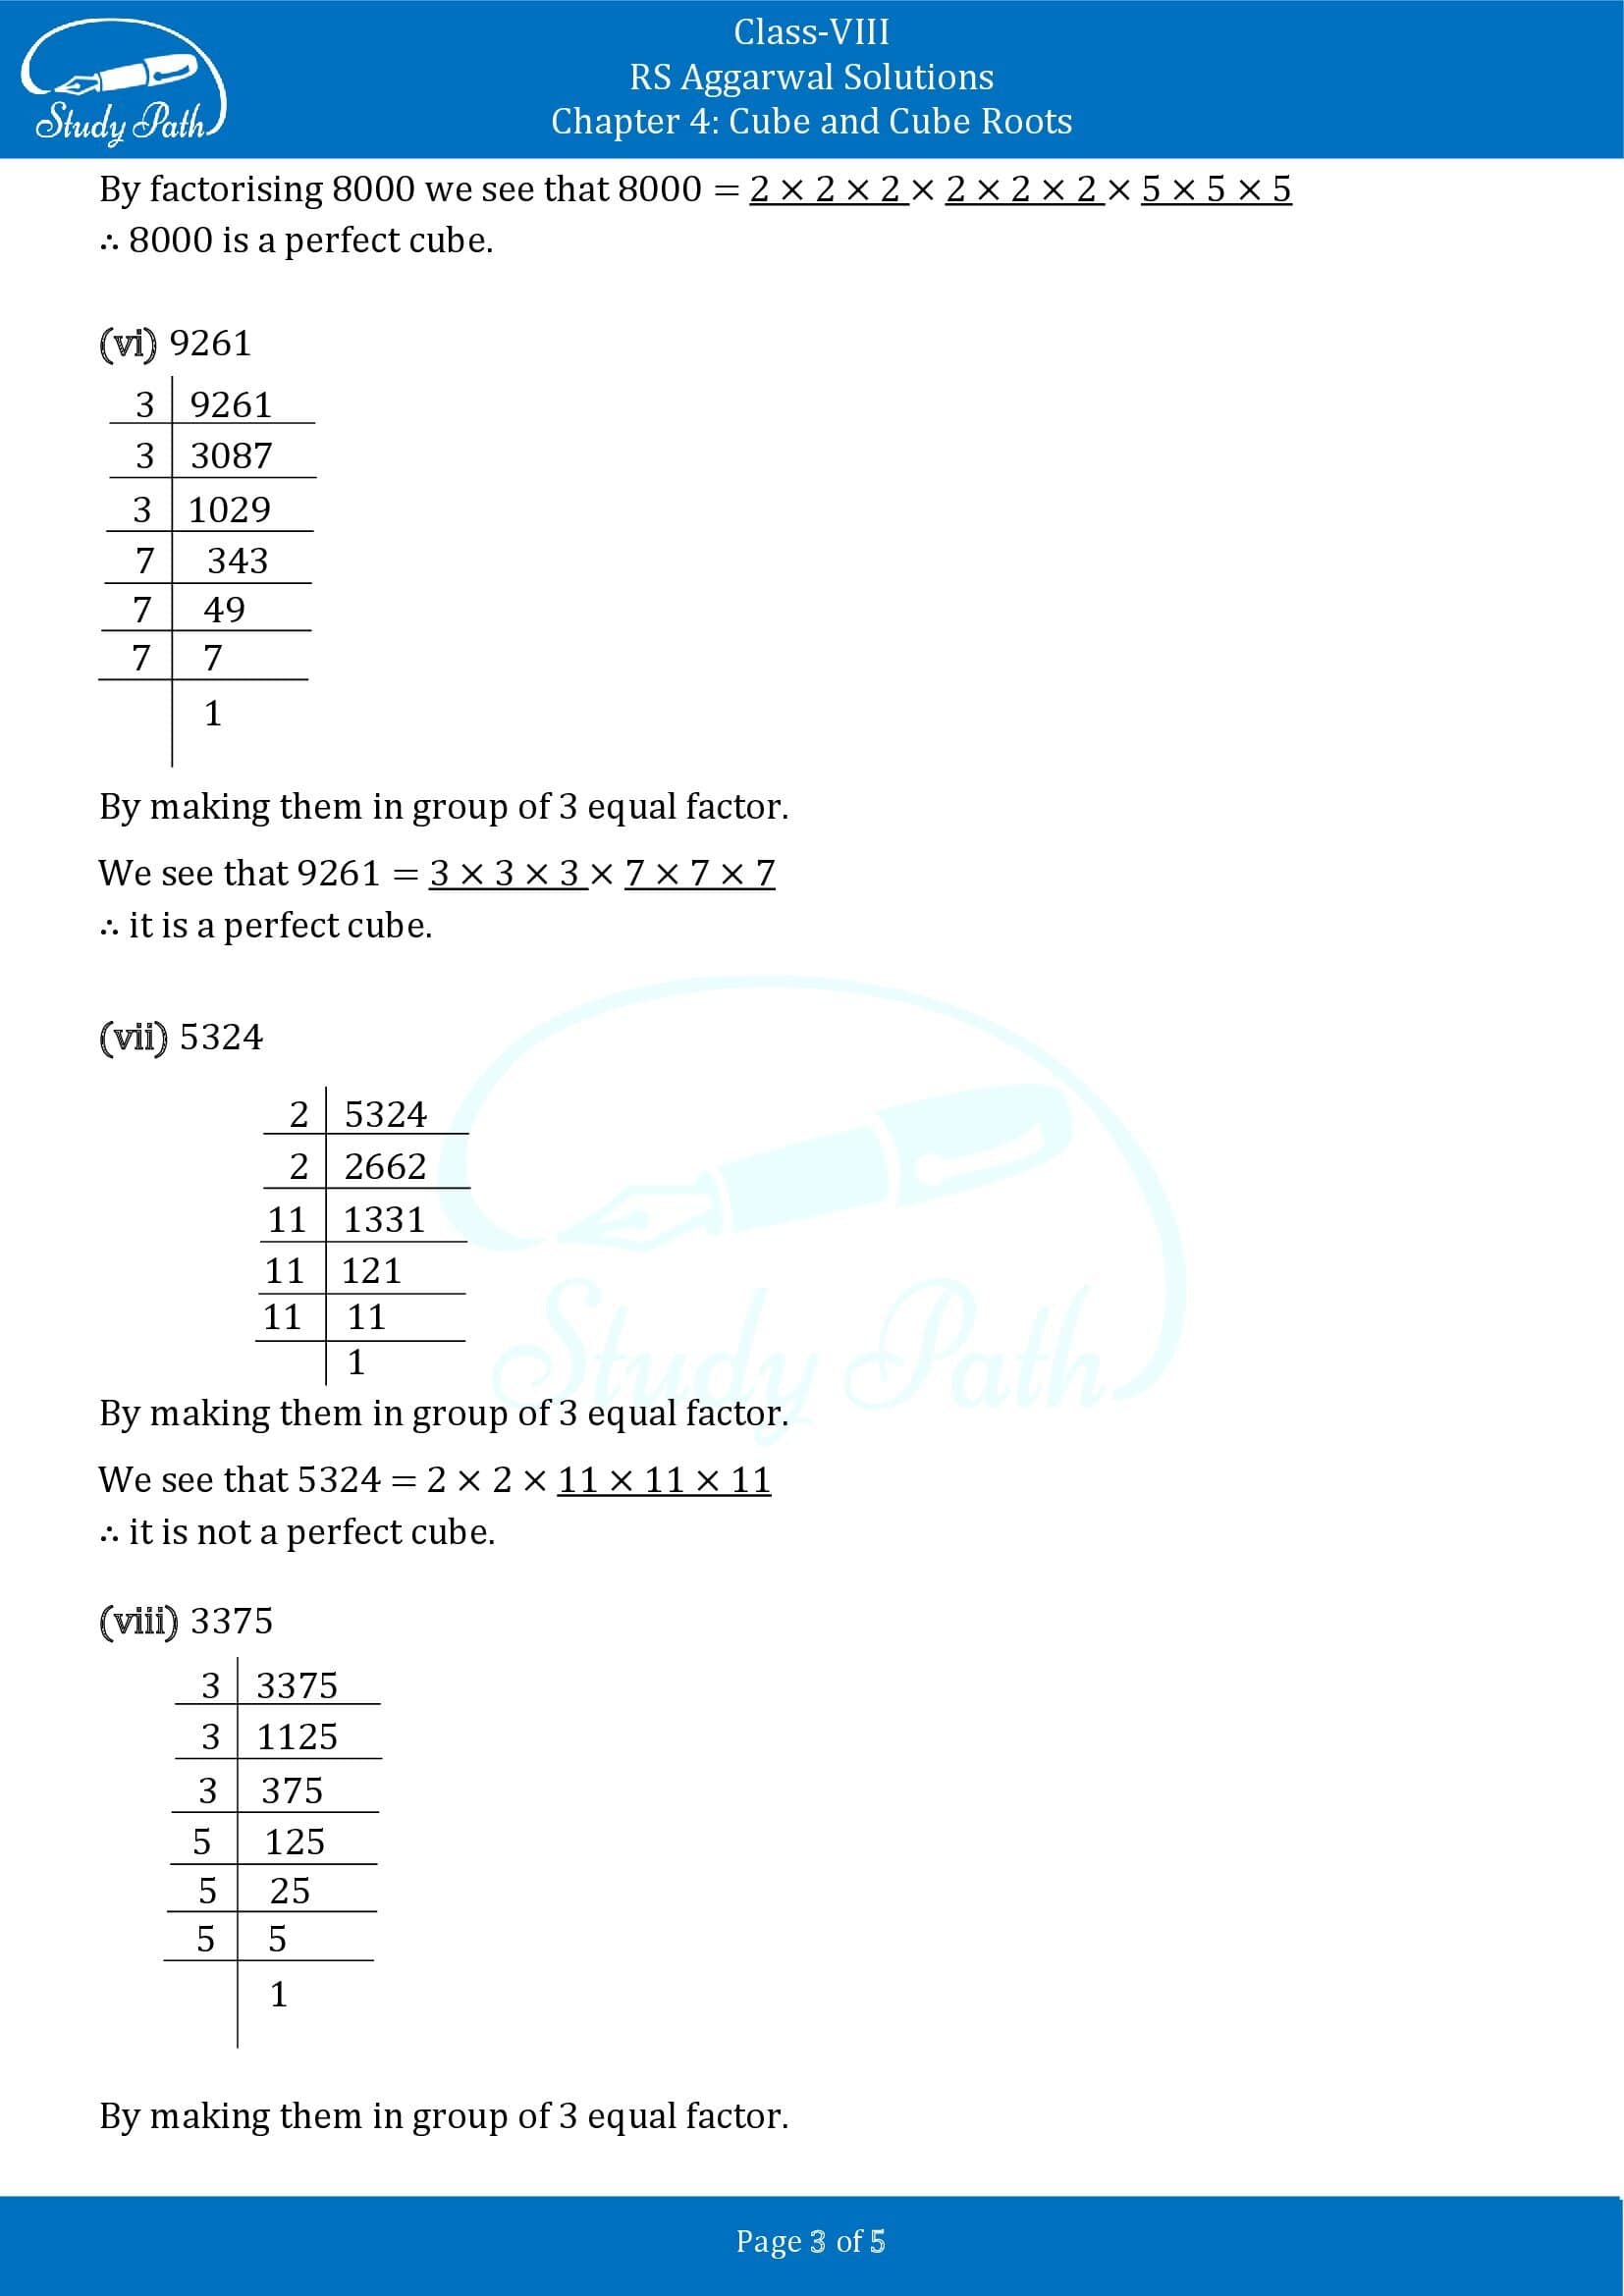 RS Aggarwal Solutions Class 8 Chapter 4 Cube and Cube Roots Exercise 4A 00003